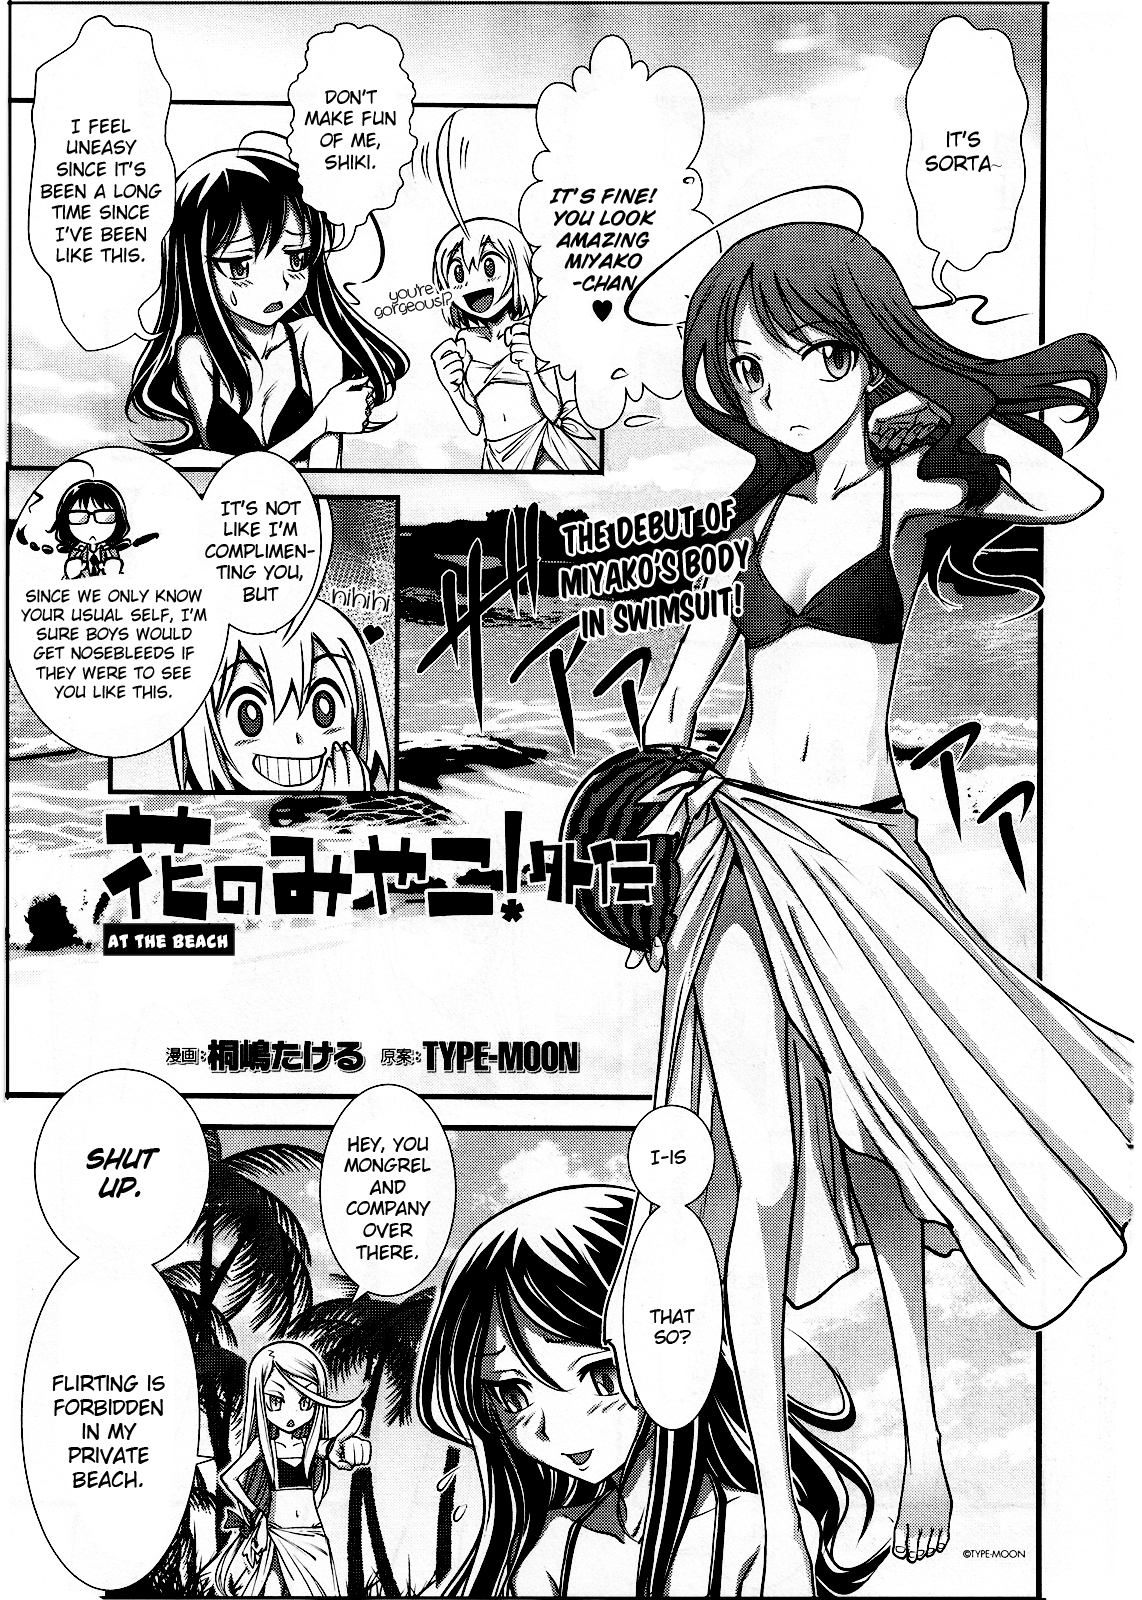 Hana No Miyako! Chapter 17.9: At The Beach (Type-Moon Ace 10 Extra Chapter) - Picture 1